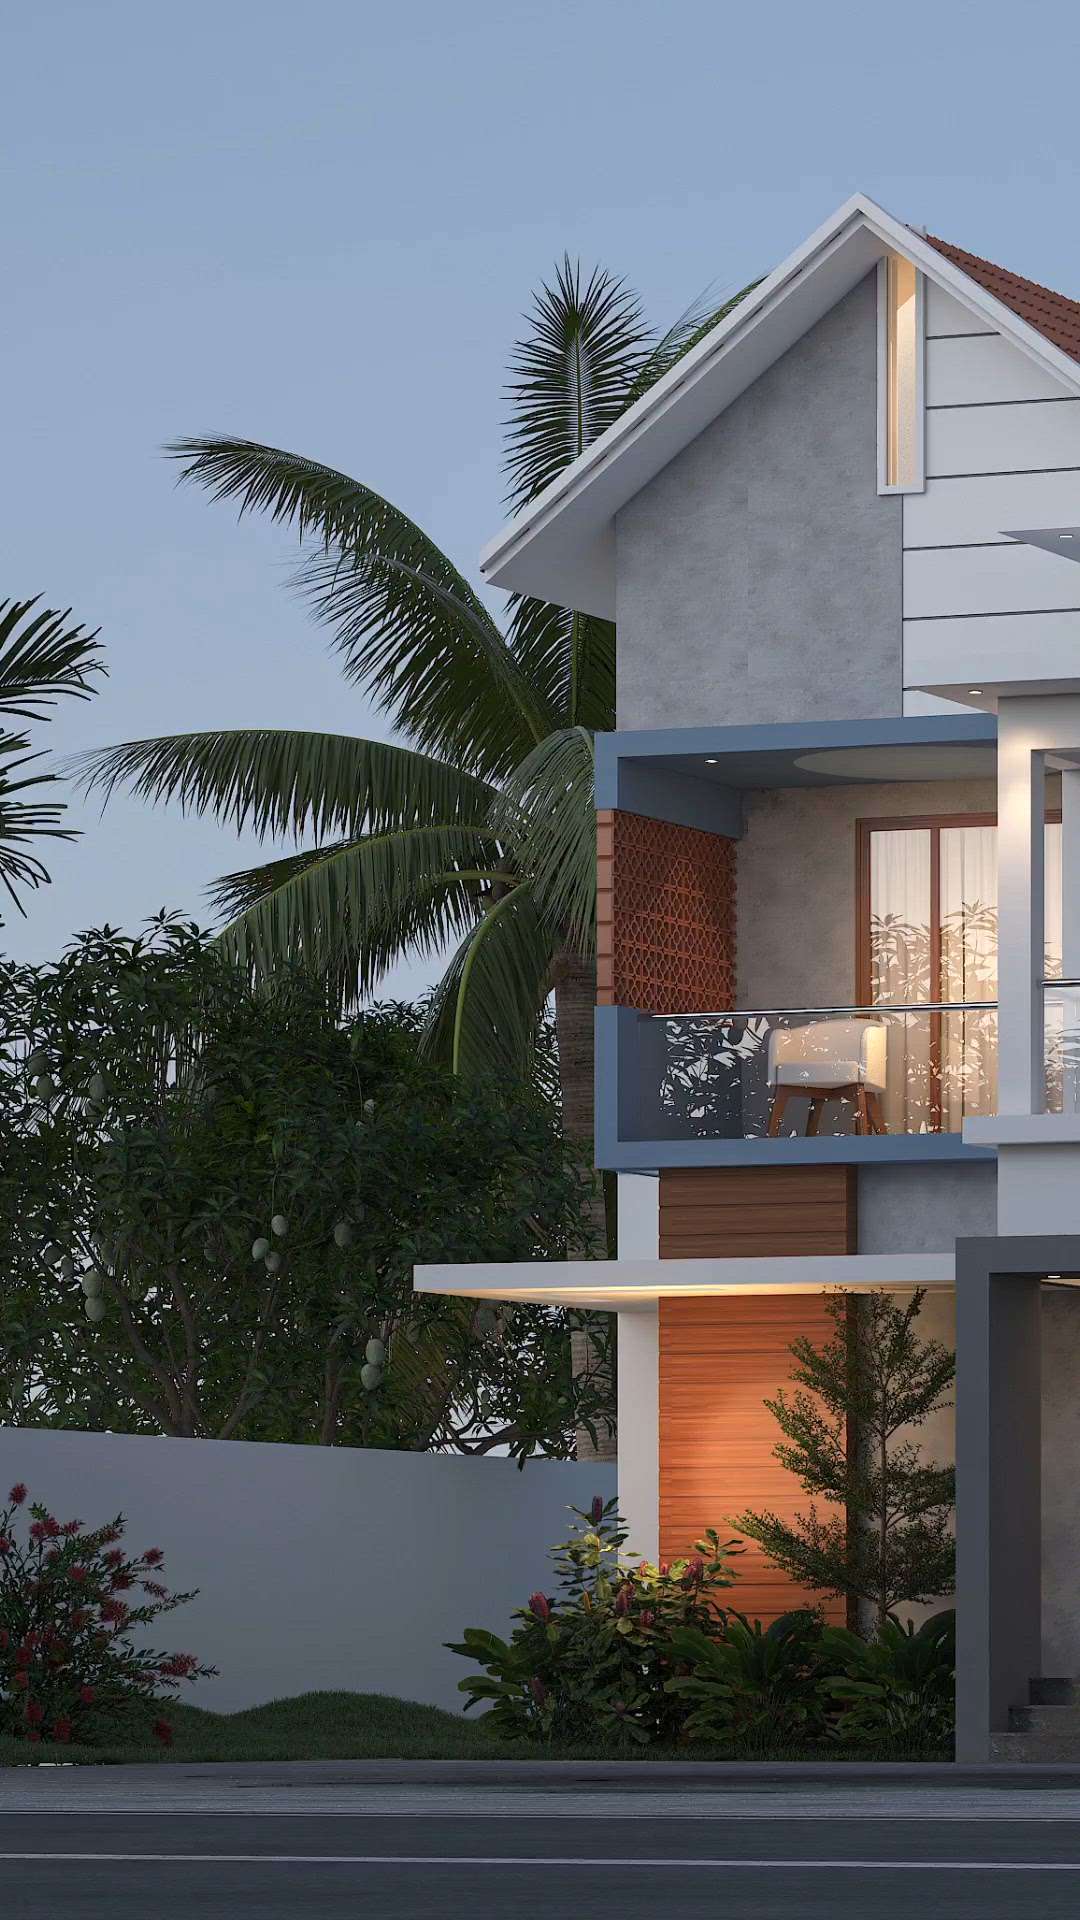 Mixed roof home design
1800 sqft 
4 Bhk